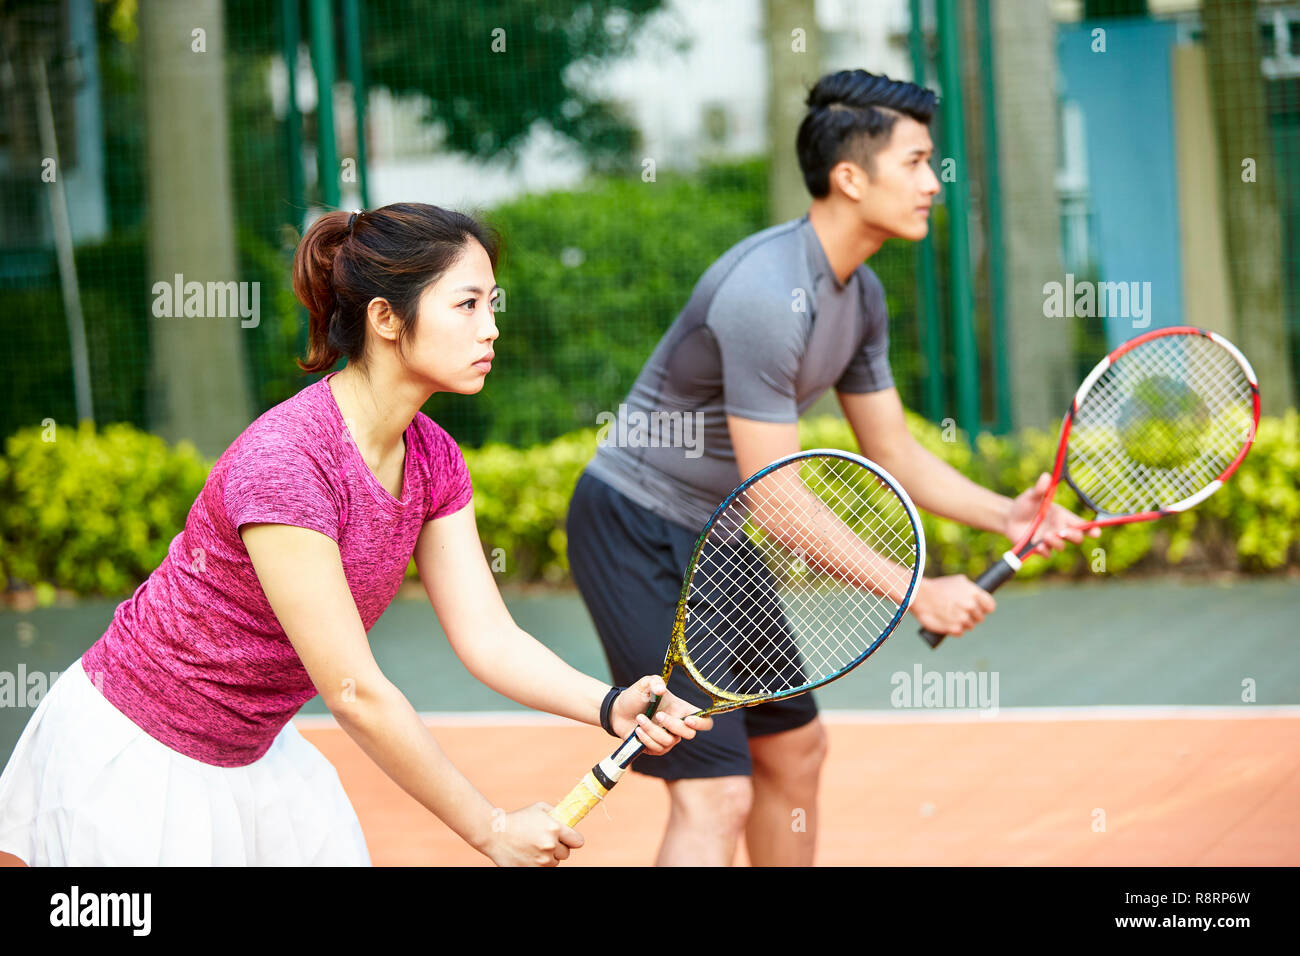 young asian pair of man and woman in a mixed double match, focus on the foreground woman Stock Photo